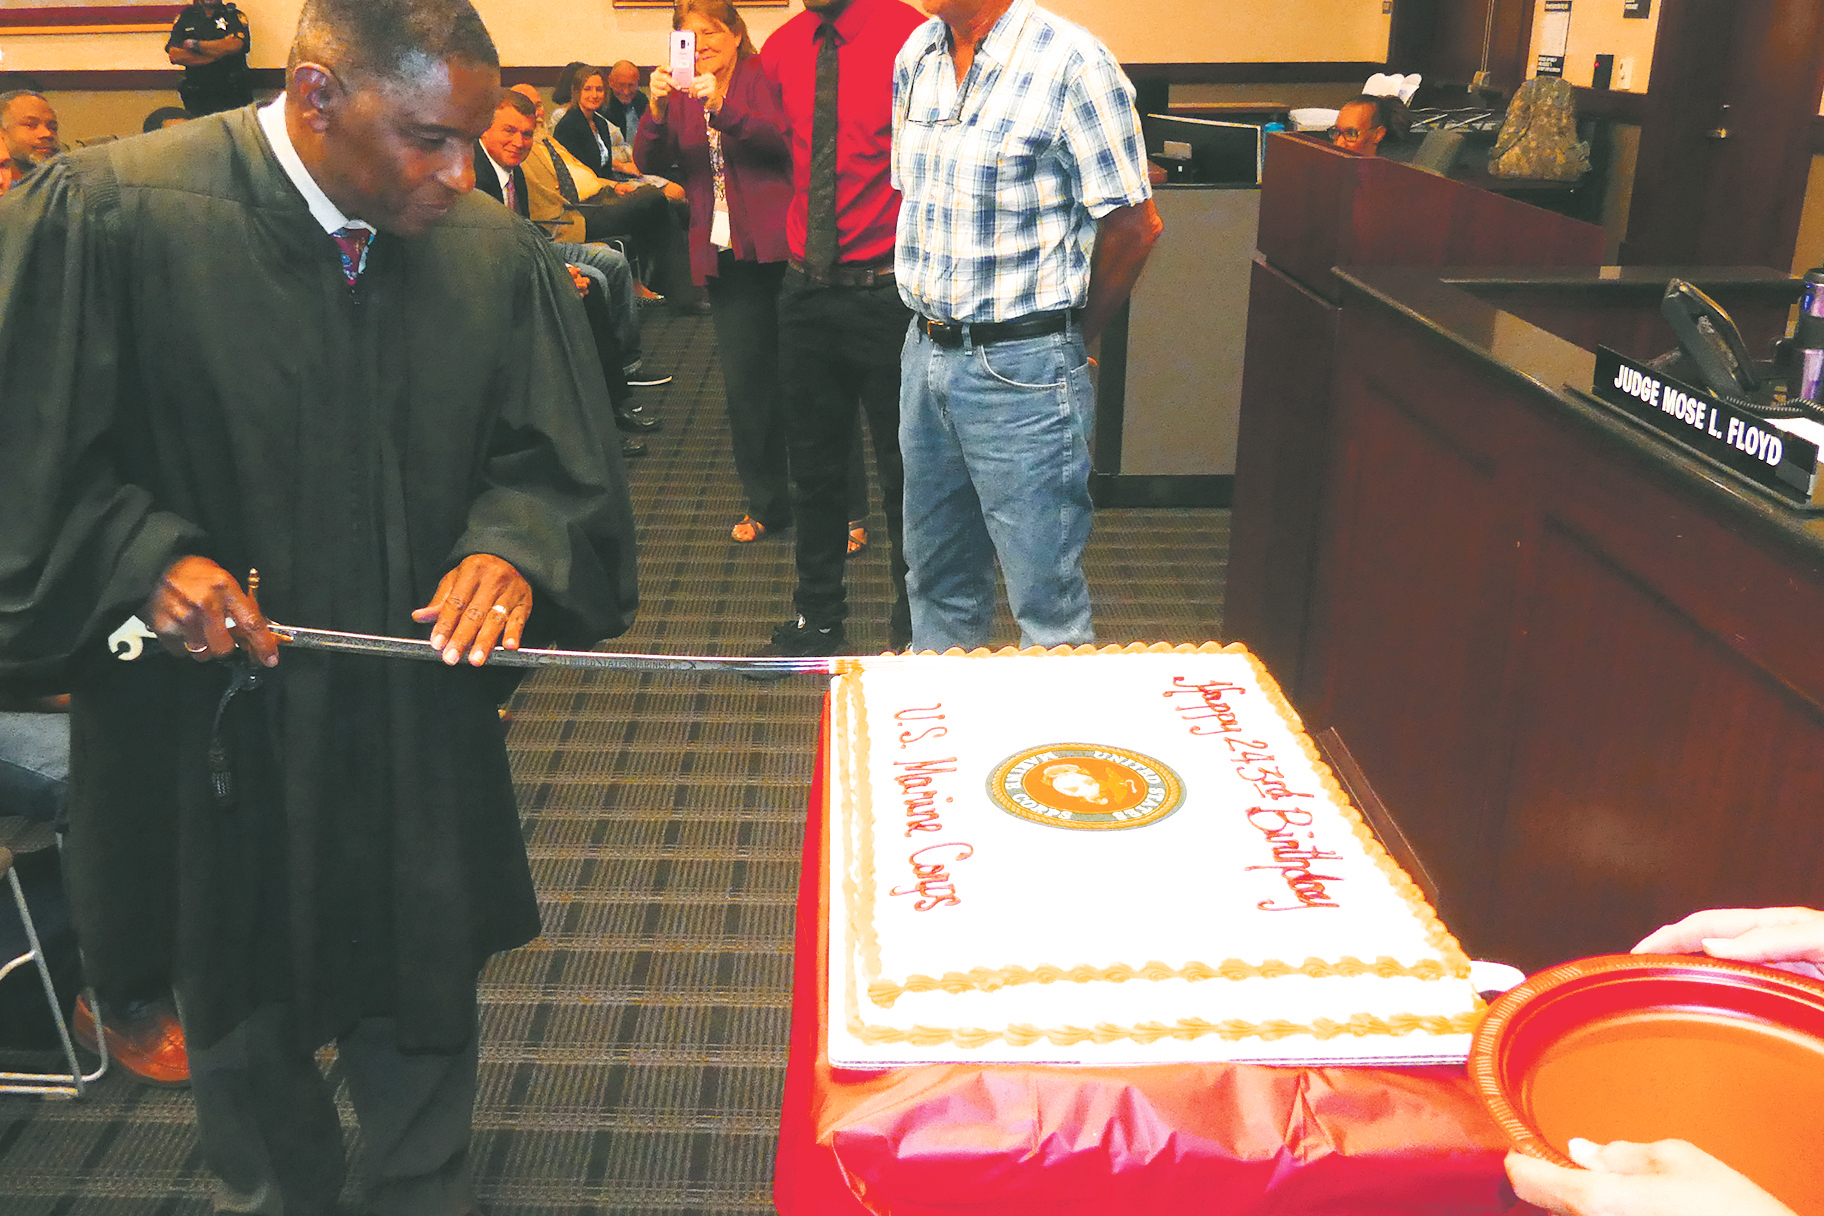 Duval County Judge Mose Floyd, a retired U.S. Marine Corps lieutenant colonel, used his officer’s sword to cut a cake to celebrate the Marines’ 243rd birthday, part of the Veterans Treatment Court proceedings Wednesday.